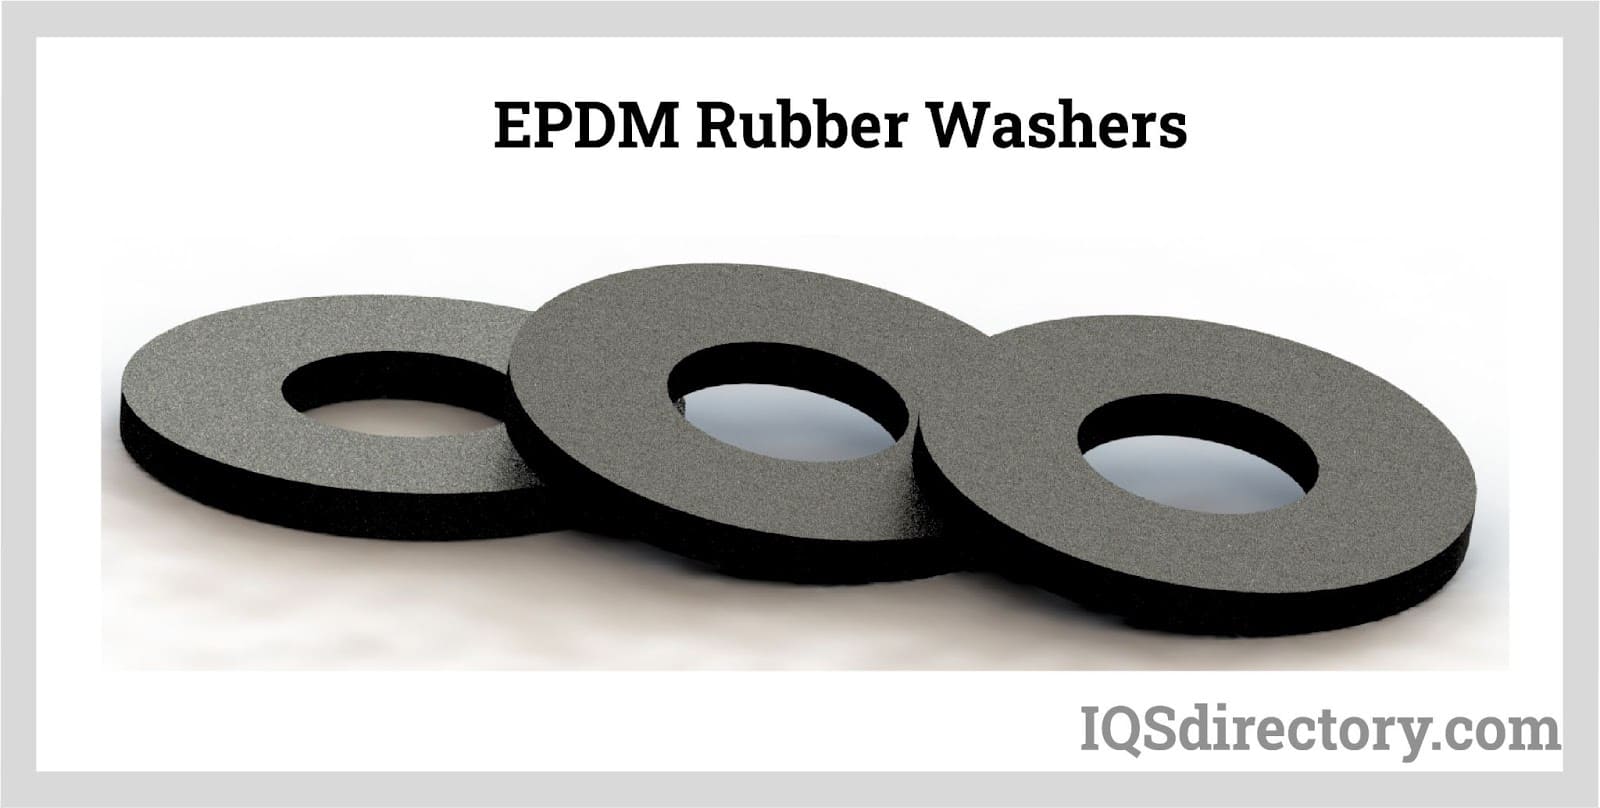 epdm rubber washers